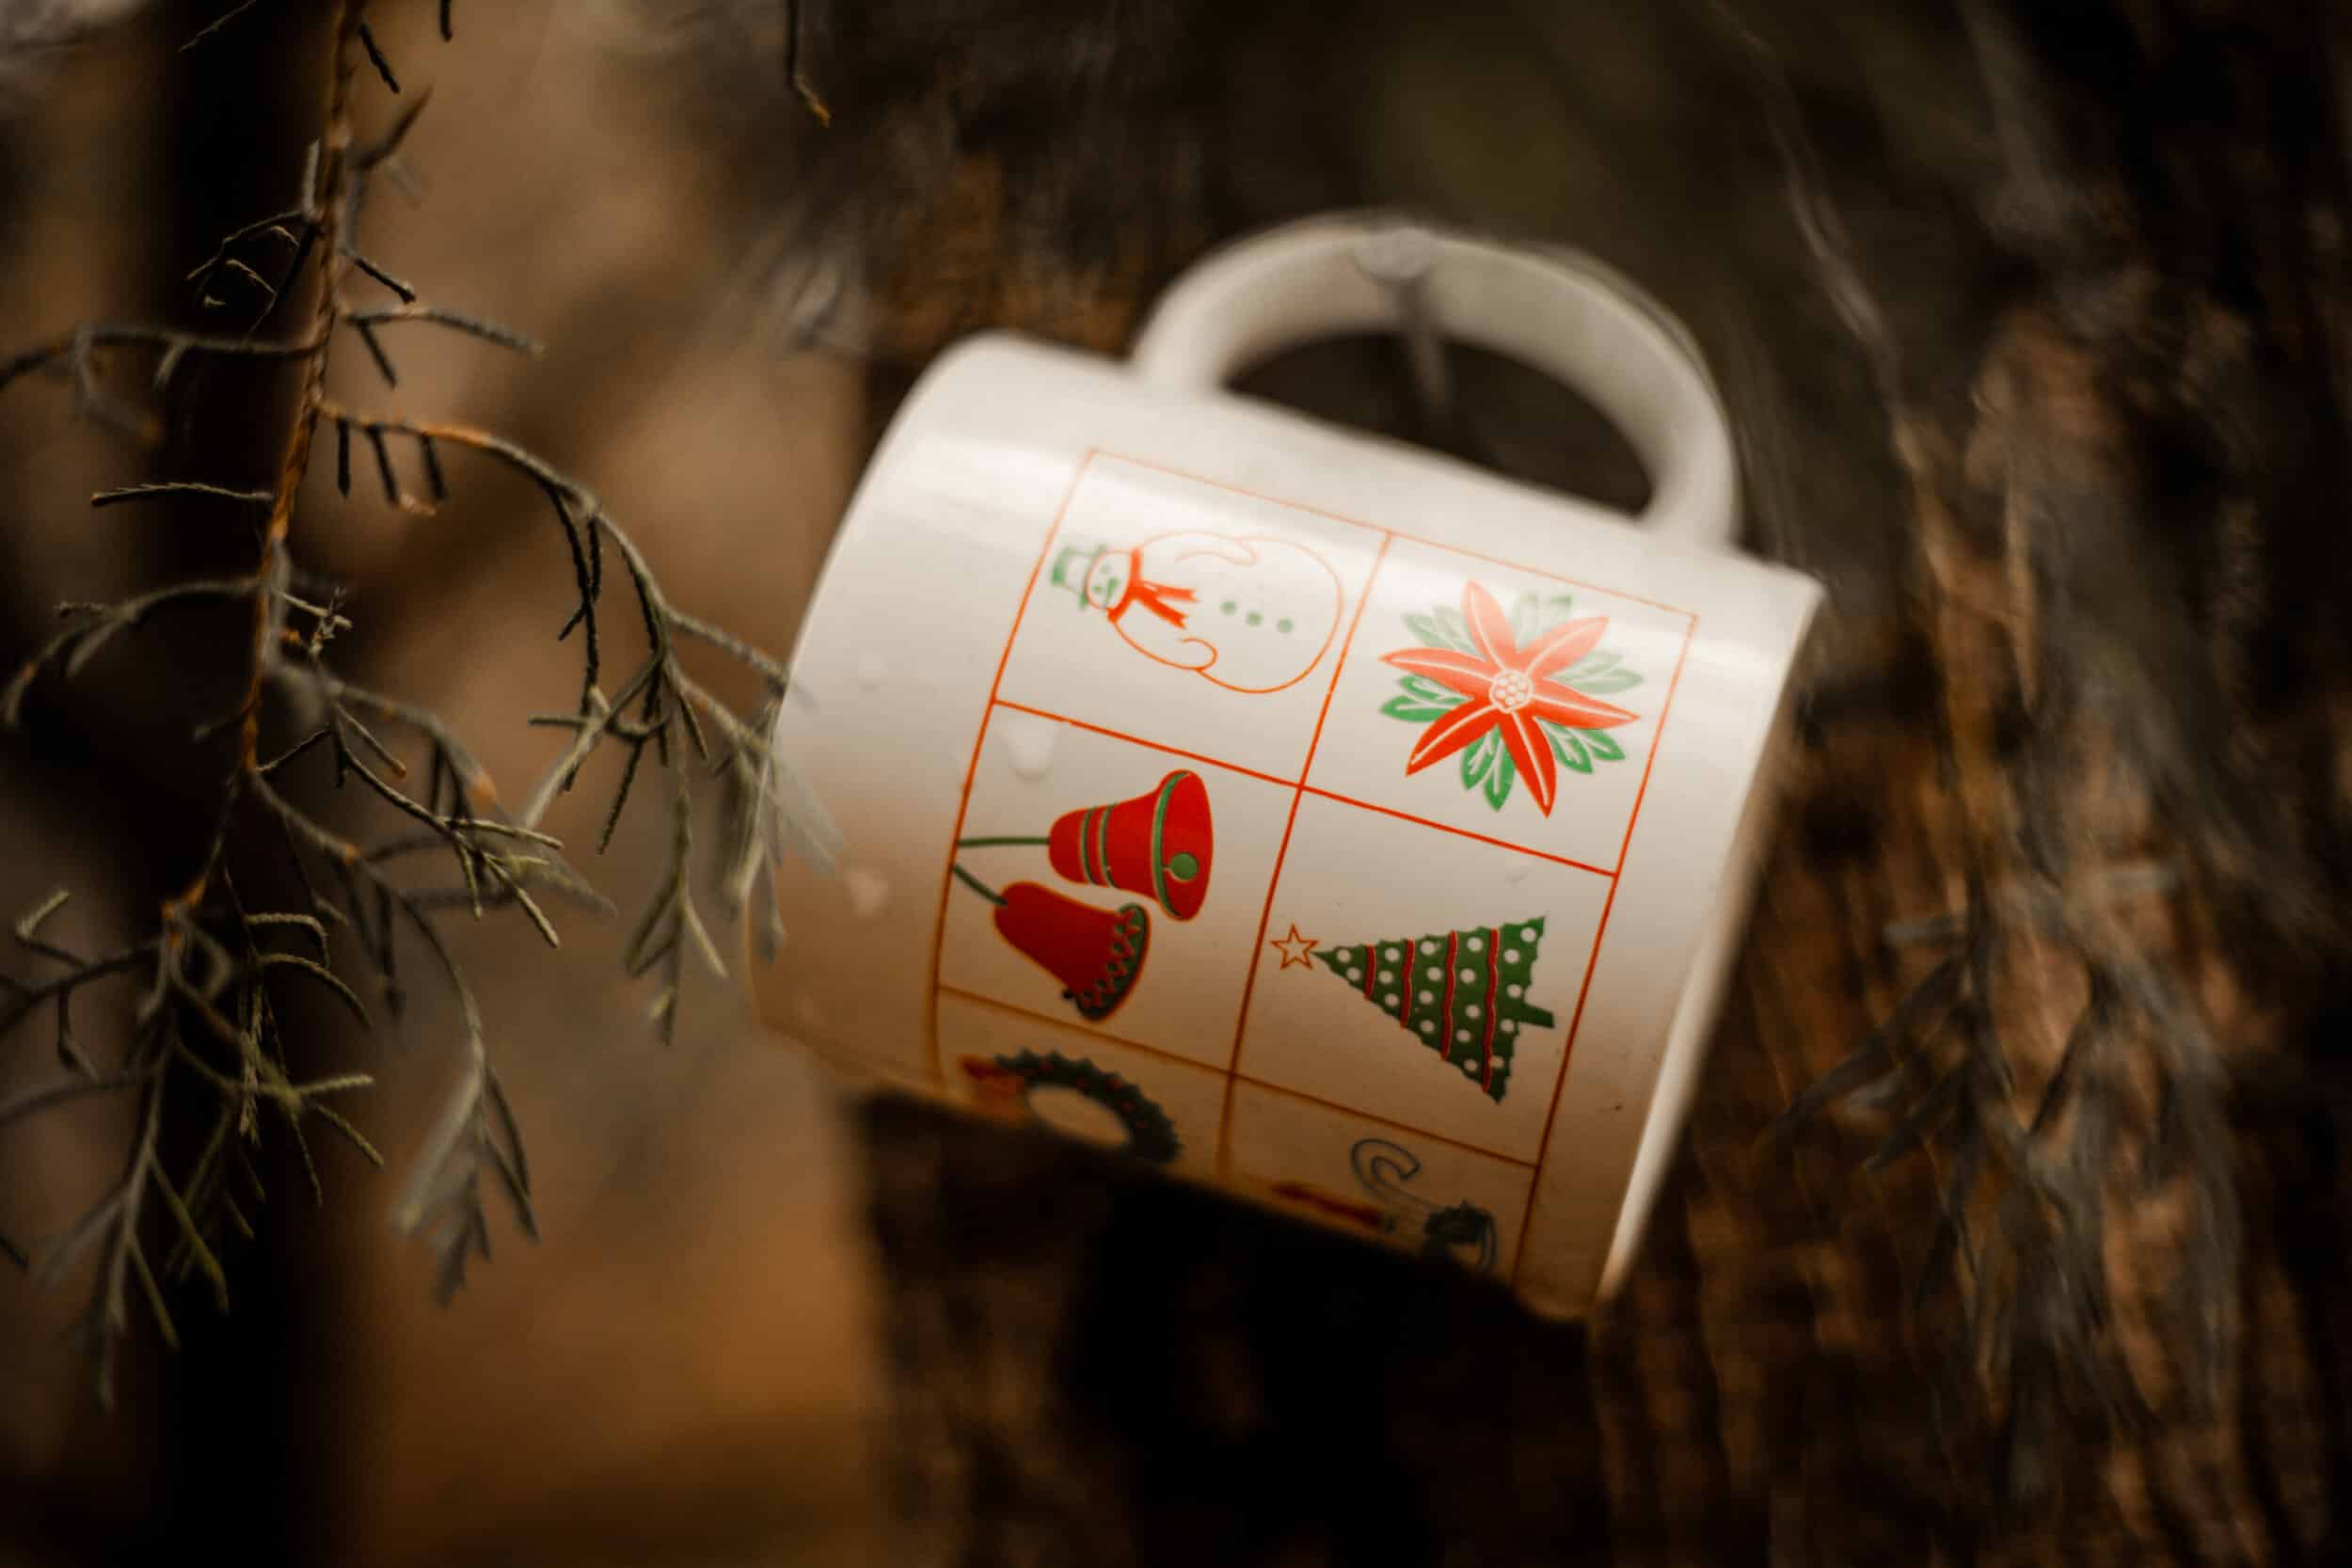 Or mugs that remind you of the holidays.